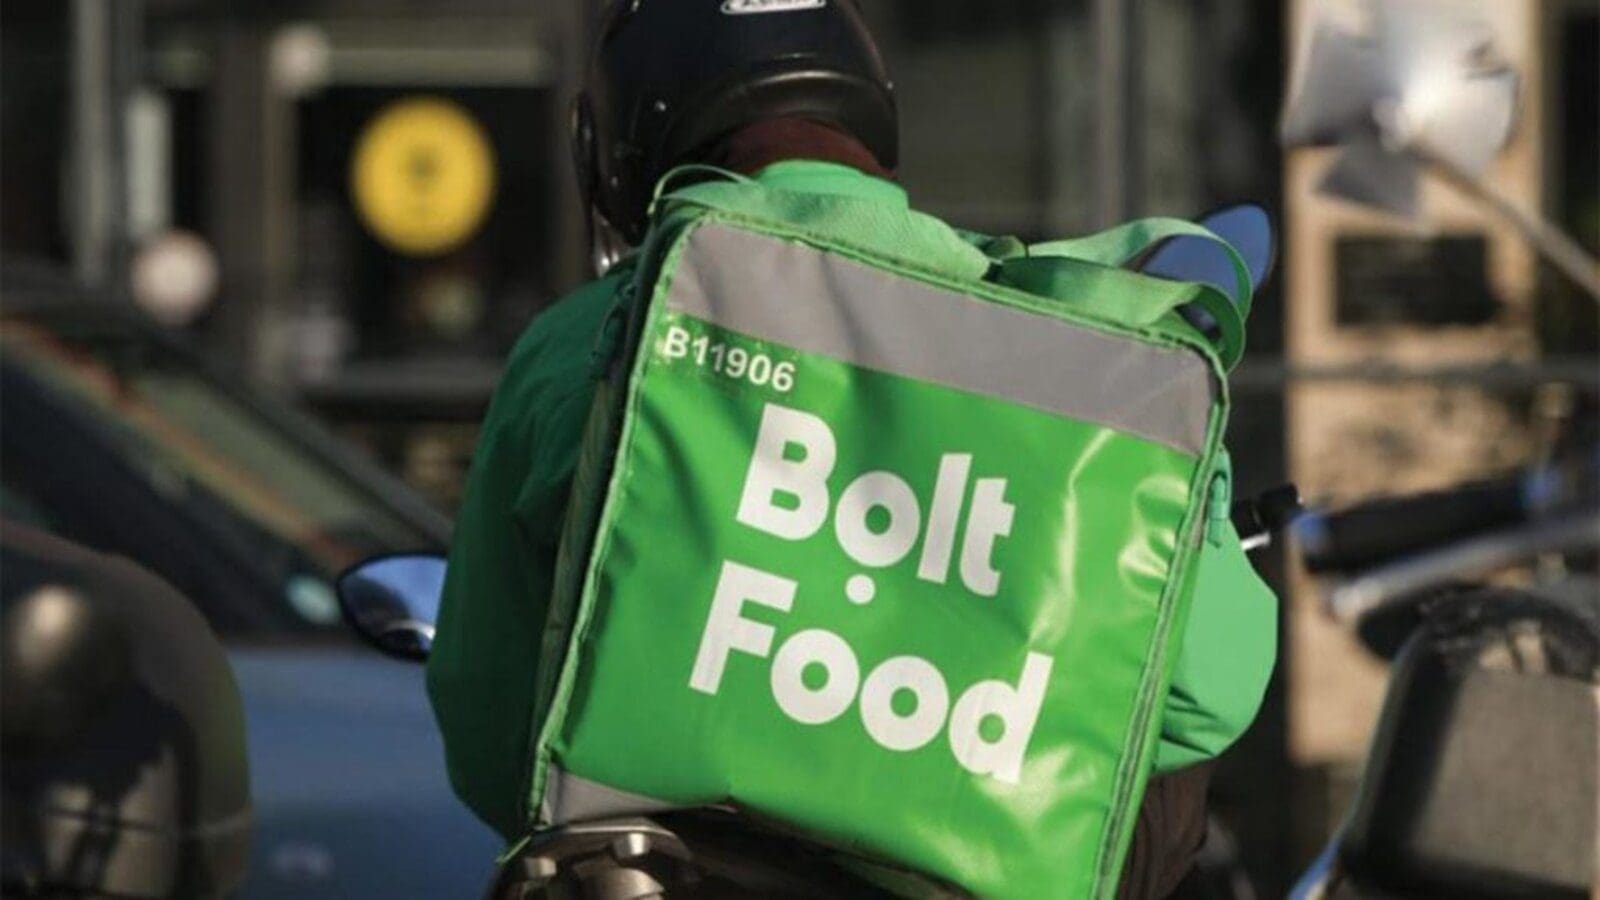 Bolt Foods introduces advanced meal ordering feature to meet growing demand